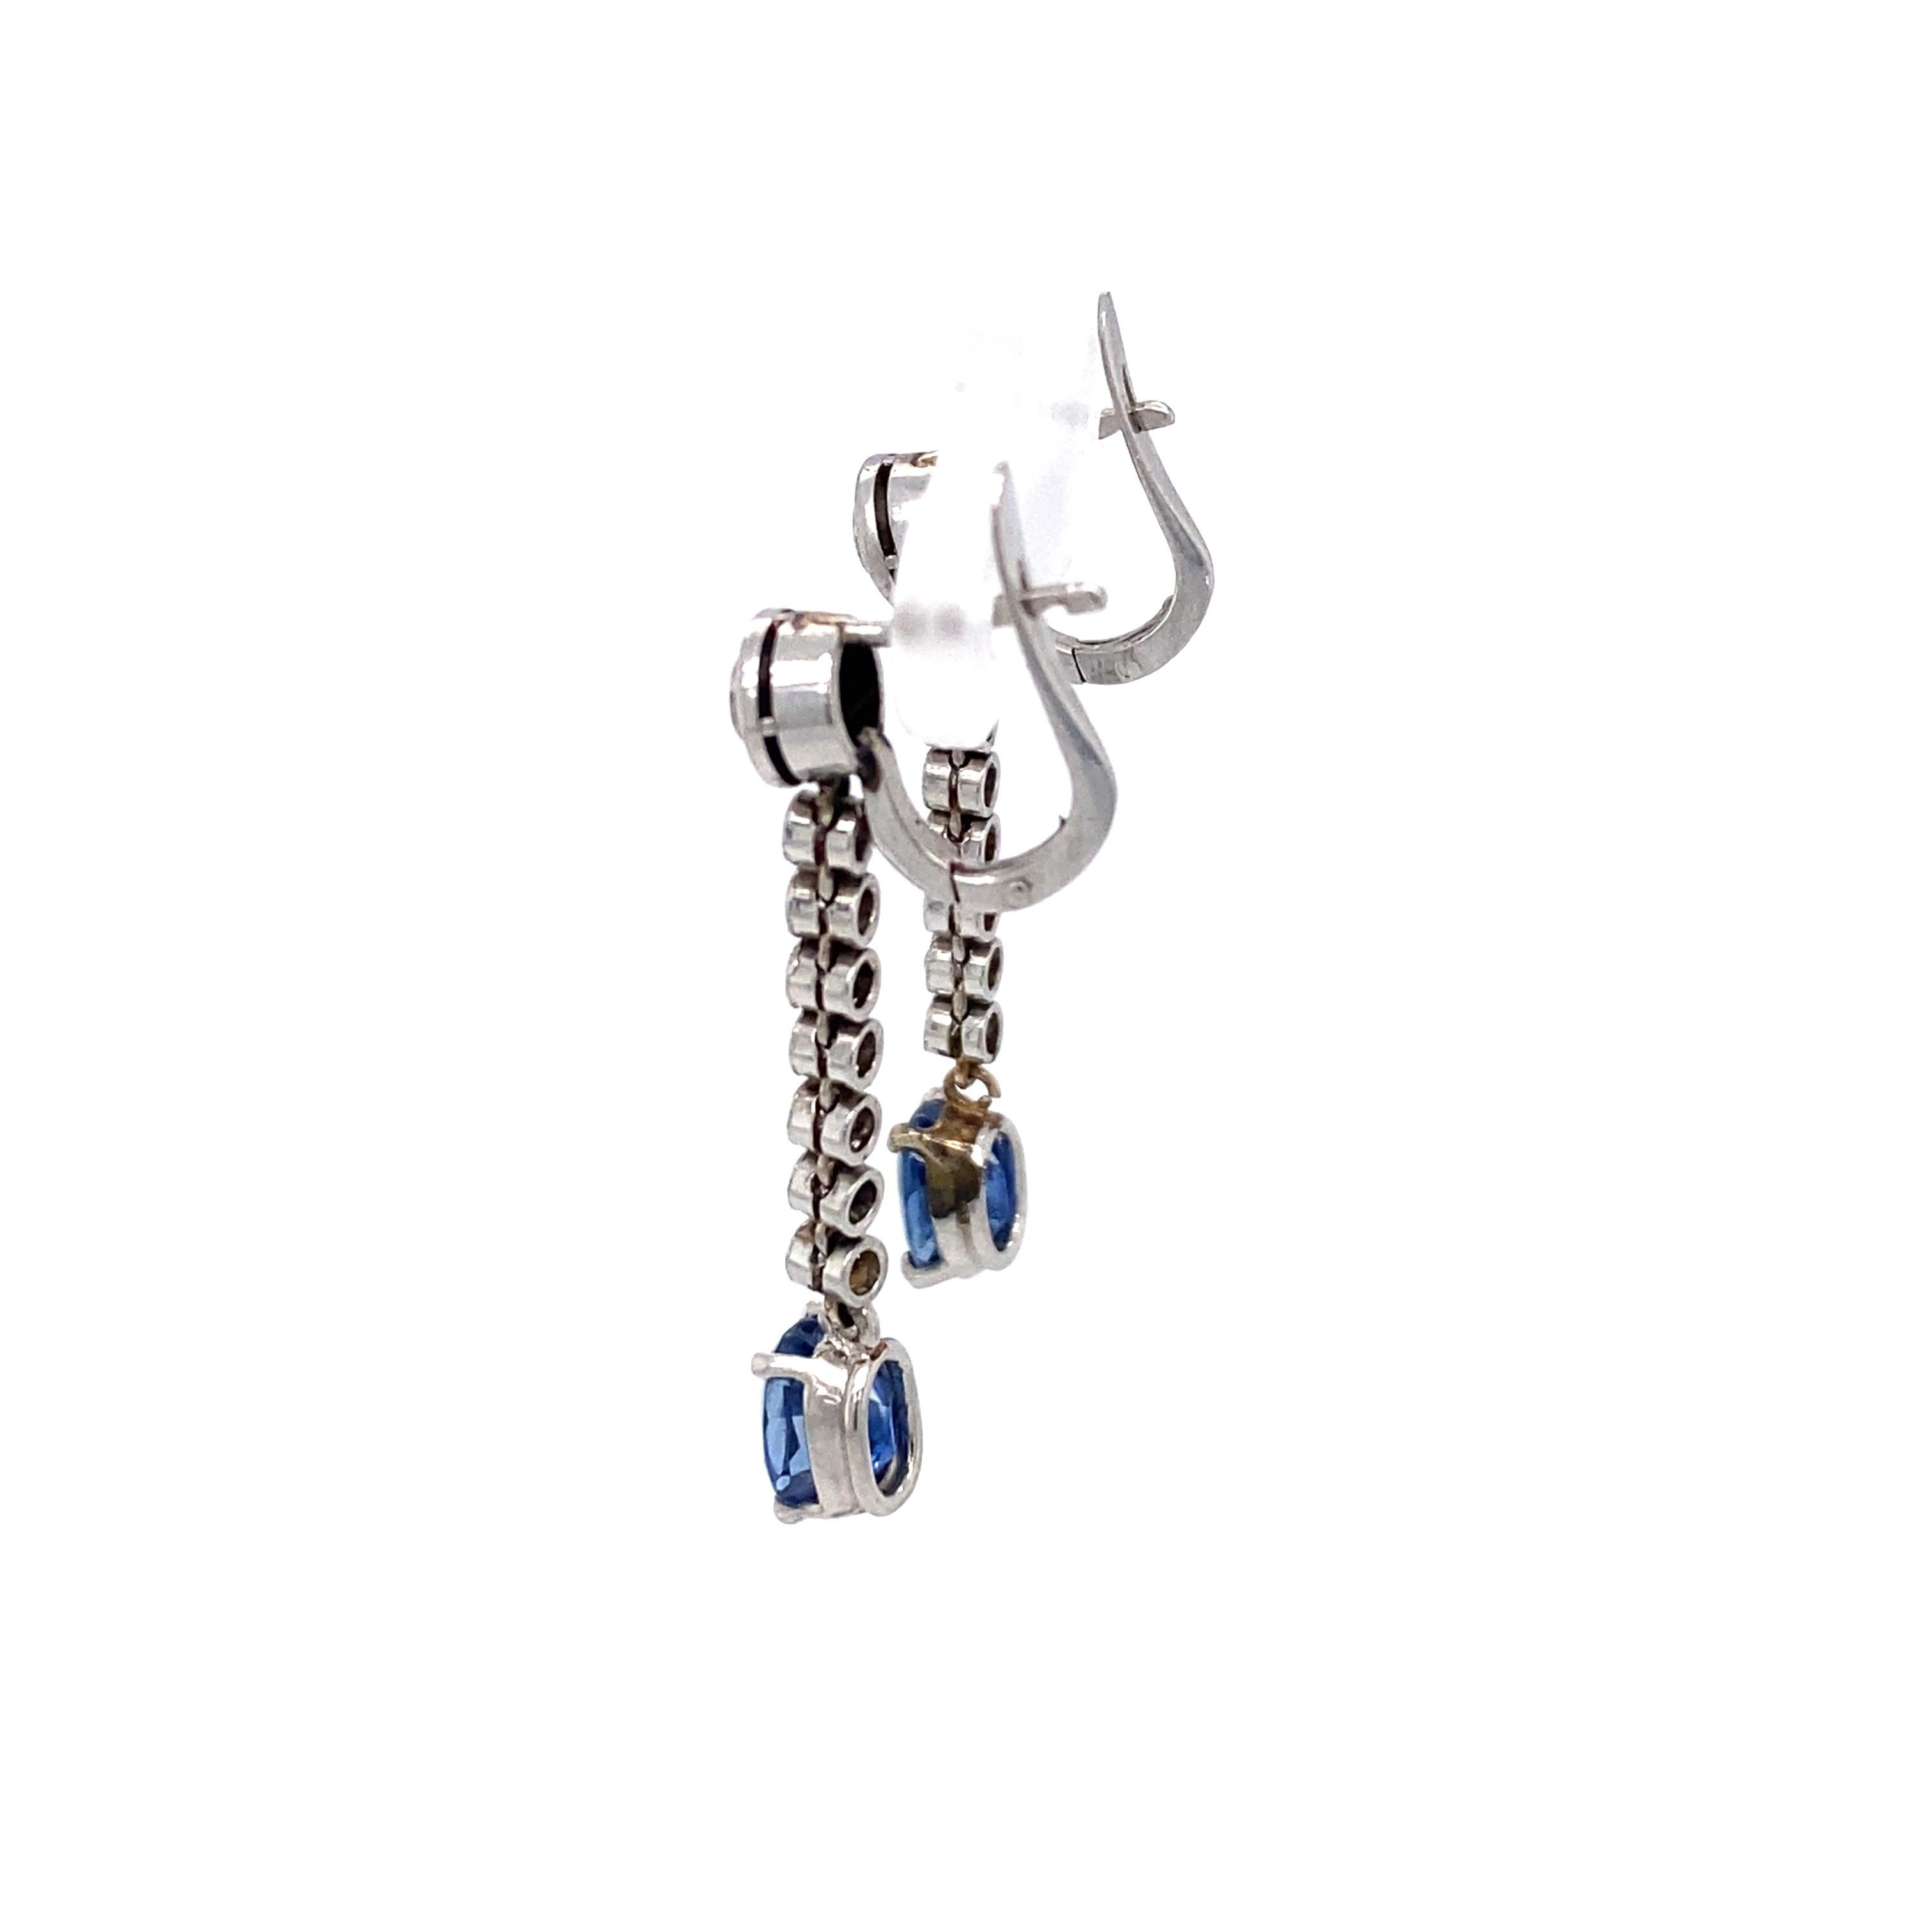 Women's 1980s 2.3 Carat Sapphire and Diamond Earrings in 14K White Gold and Platinum For Sale